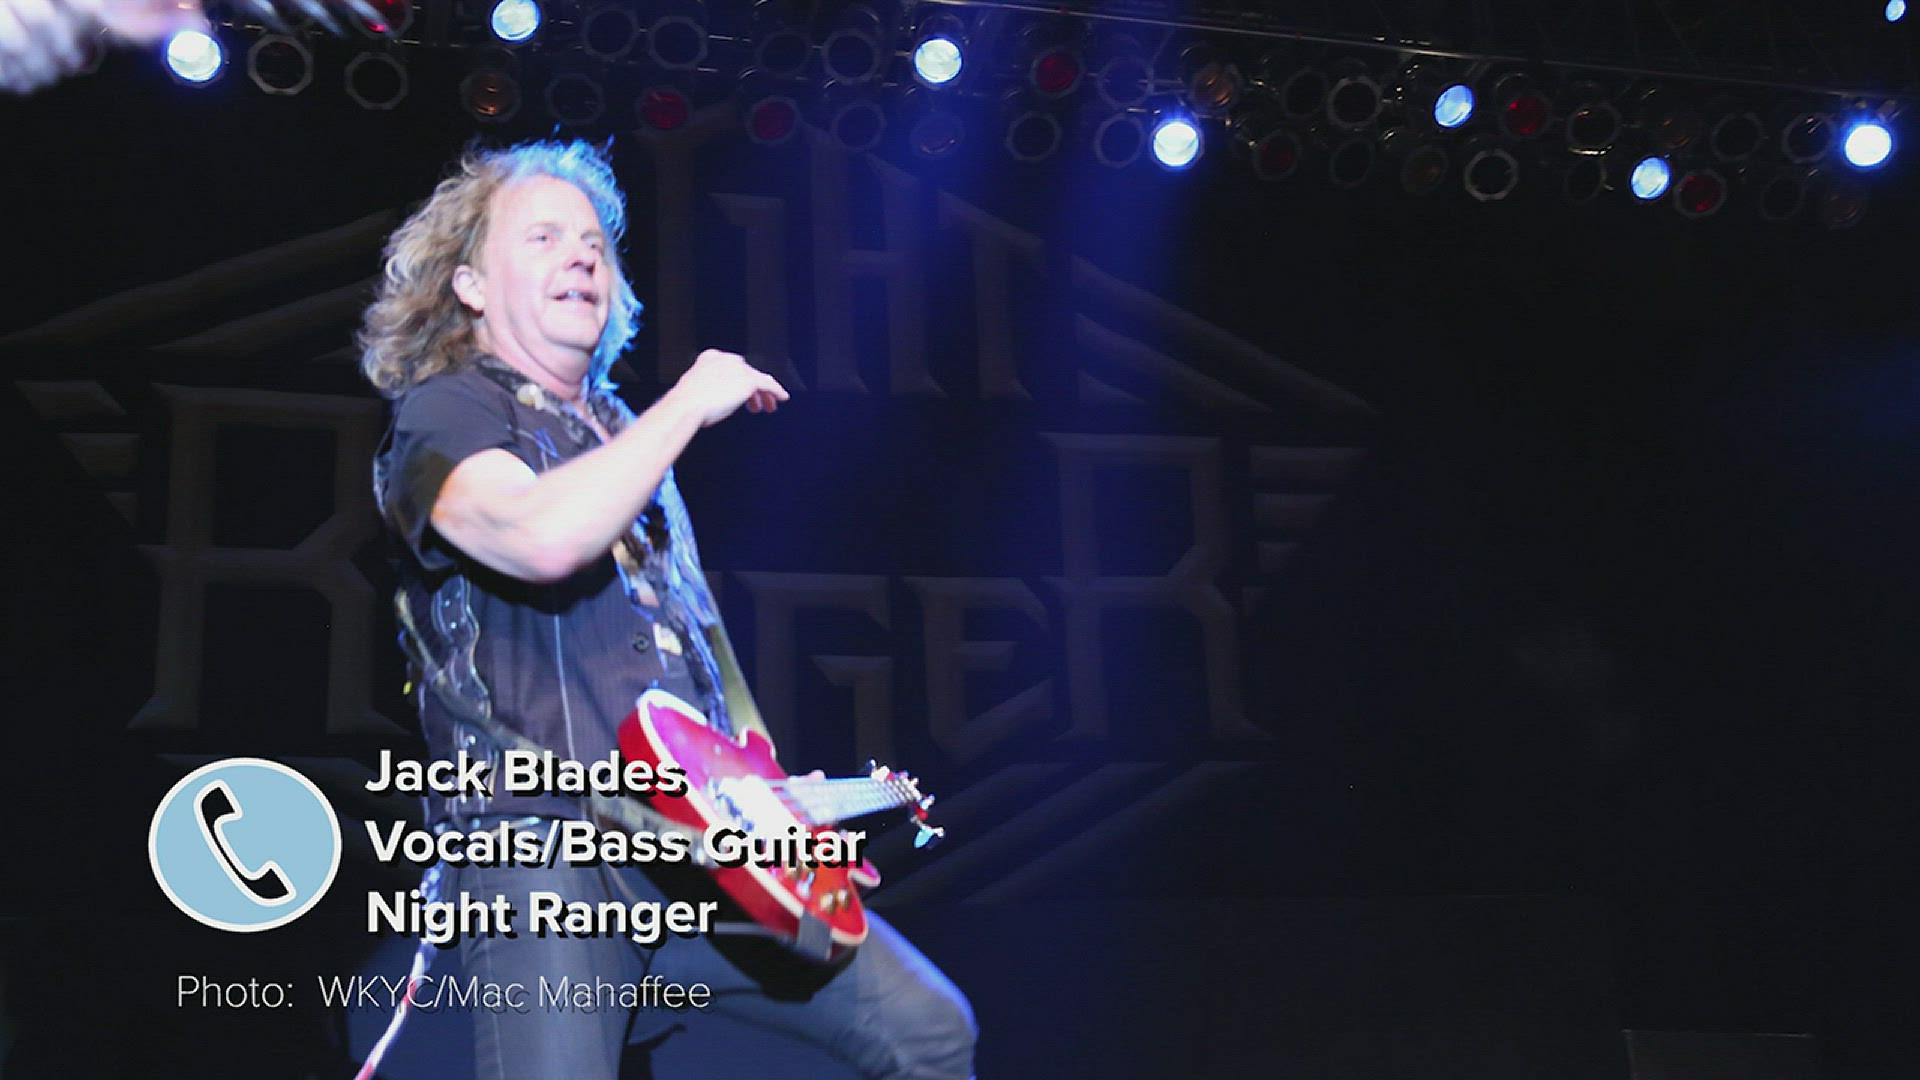 We caught up with Night Ranger front man and bassist Jack Blades after he and the 80's rock icons performed to a sold out show at the Hard Rock Rocksino at Northfield Park.  In the interview Jack talks about the band's beginnings and the role Cleveland pl